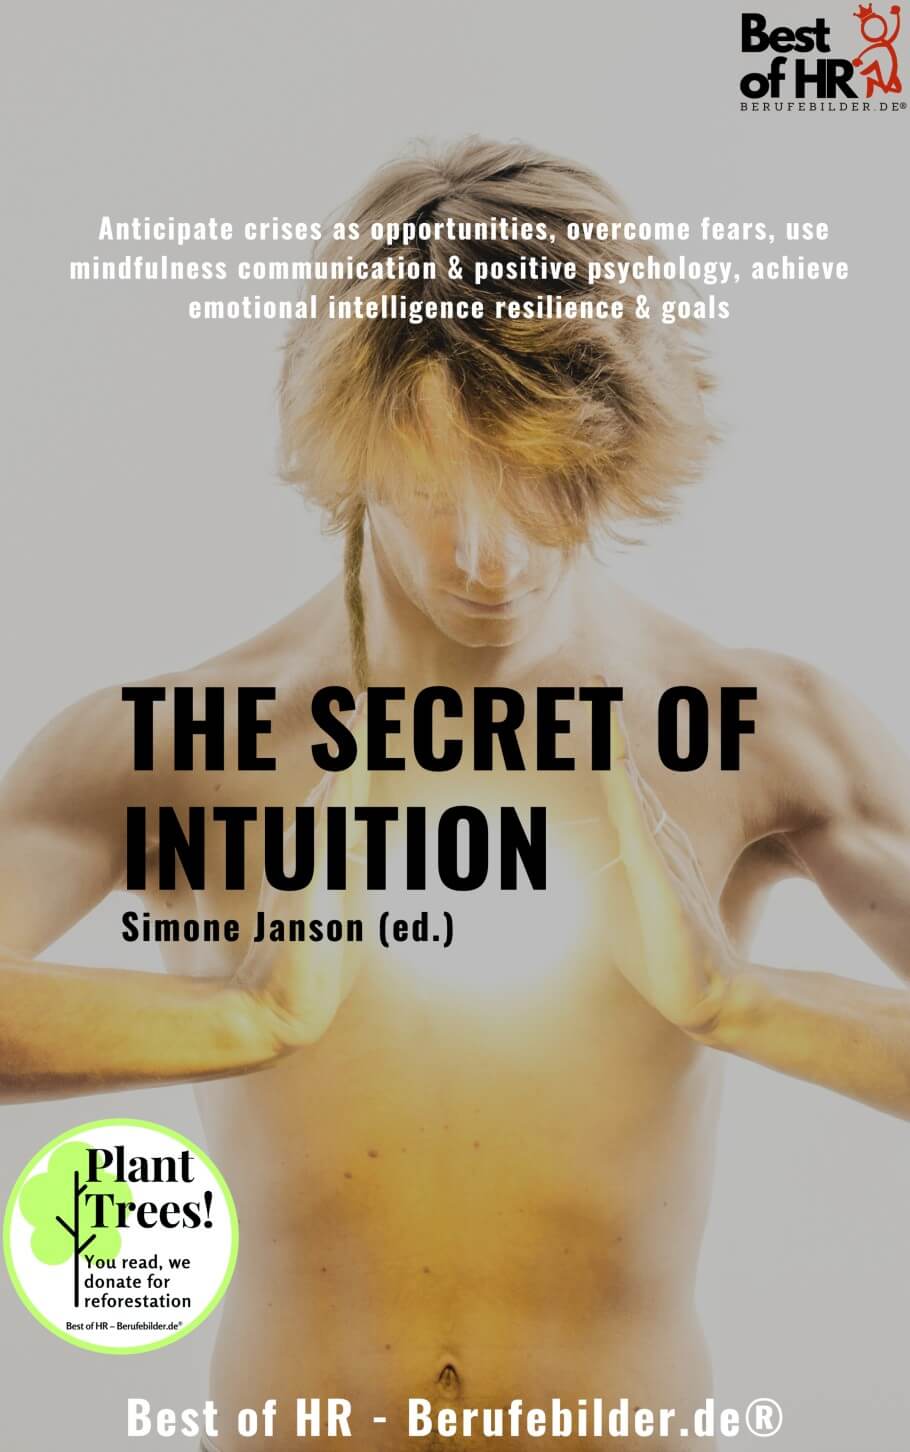 The Secret of Intuition (Engl. Version)